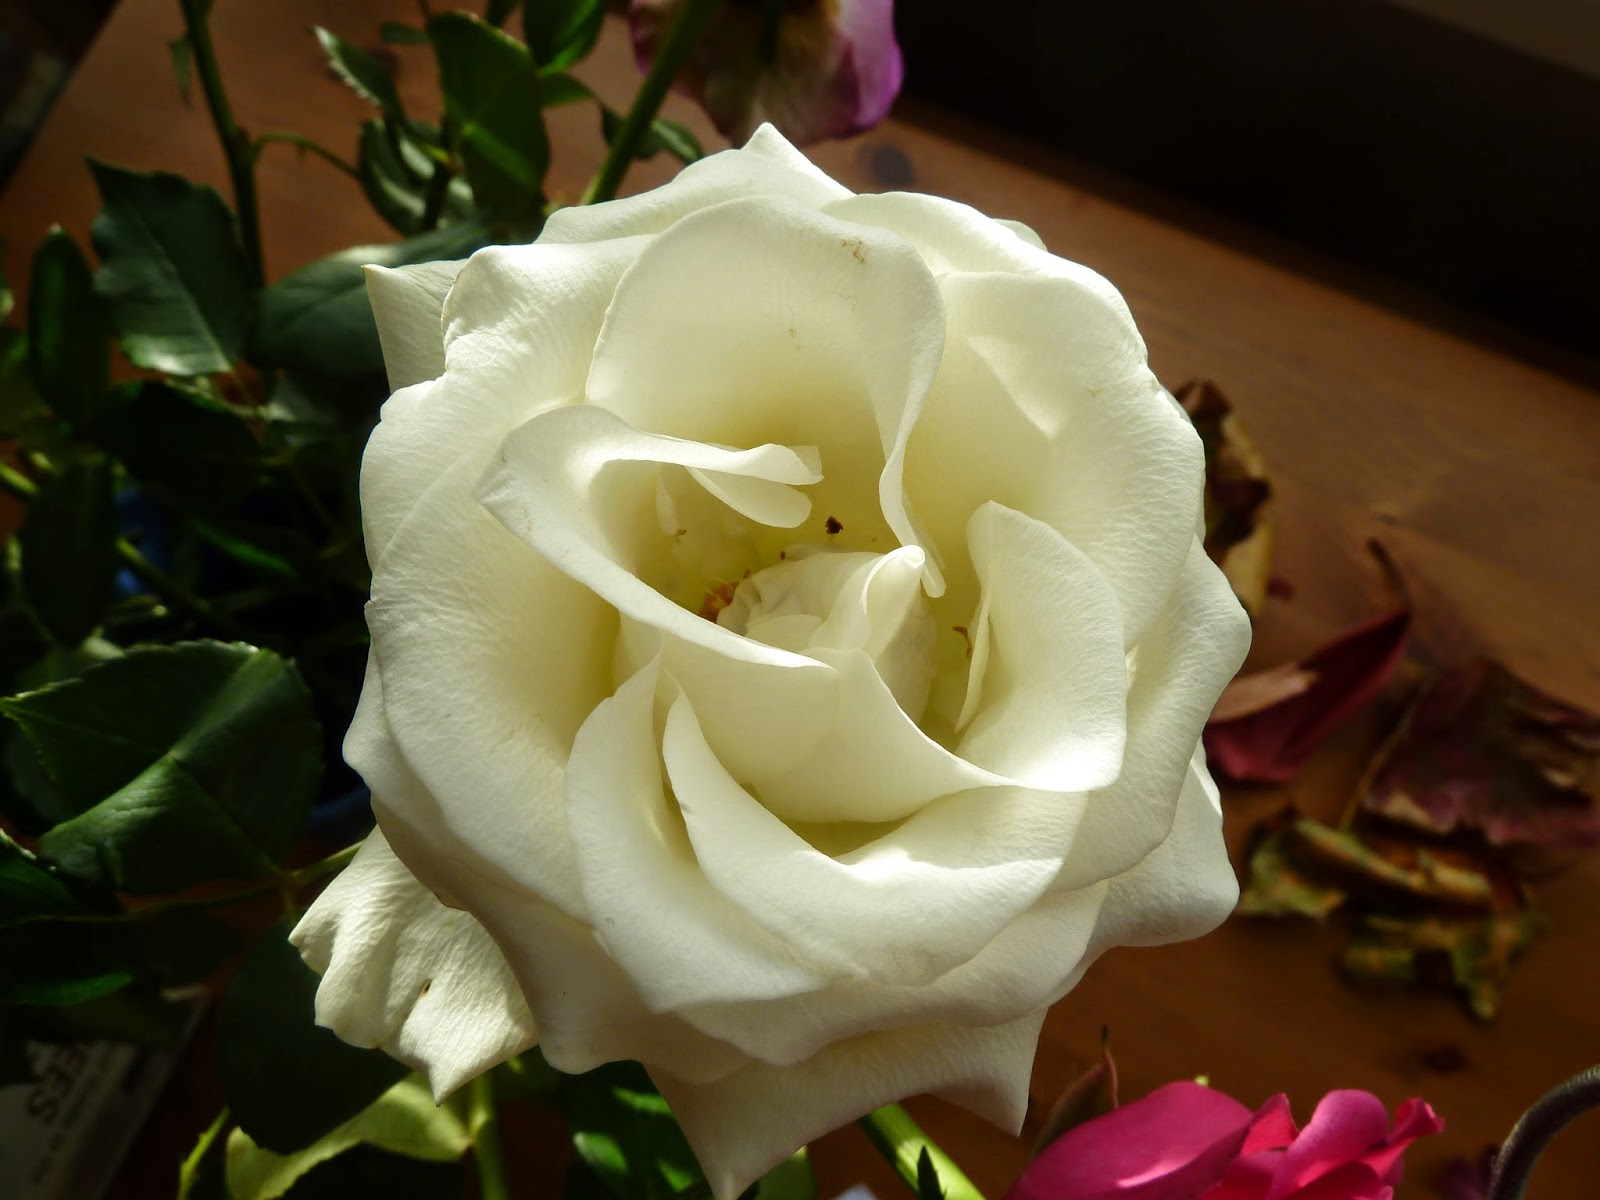 Older white rose opening out